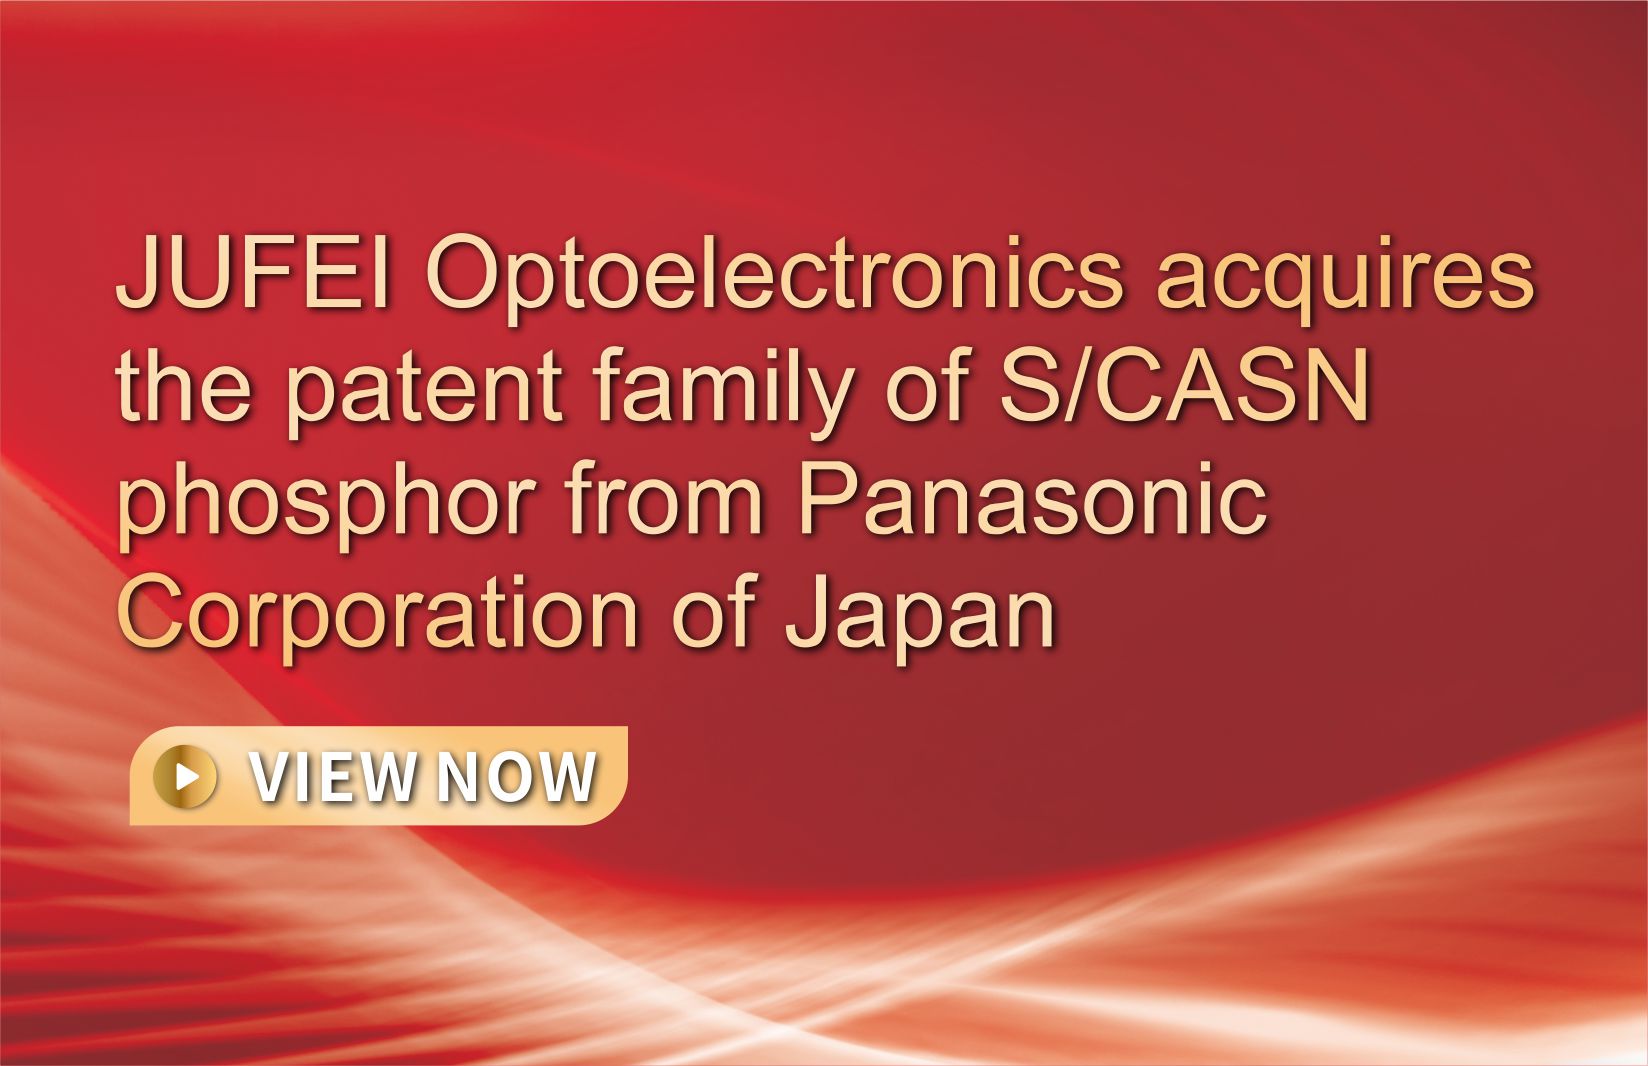 JUFEI Optoelectronics acquires the patent family of S/CASN phosphor from Panasonic Corporation of Japan